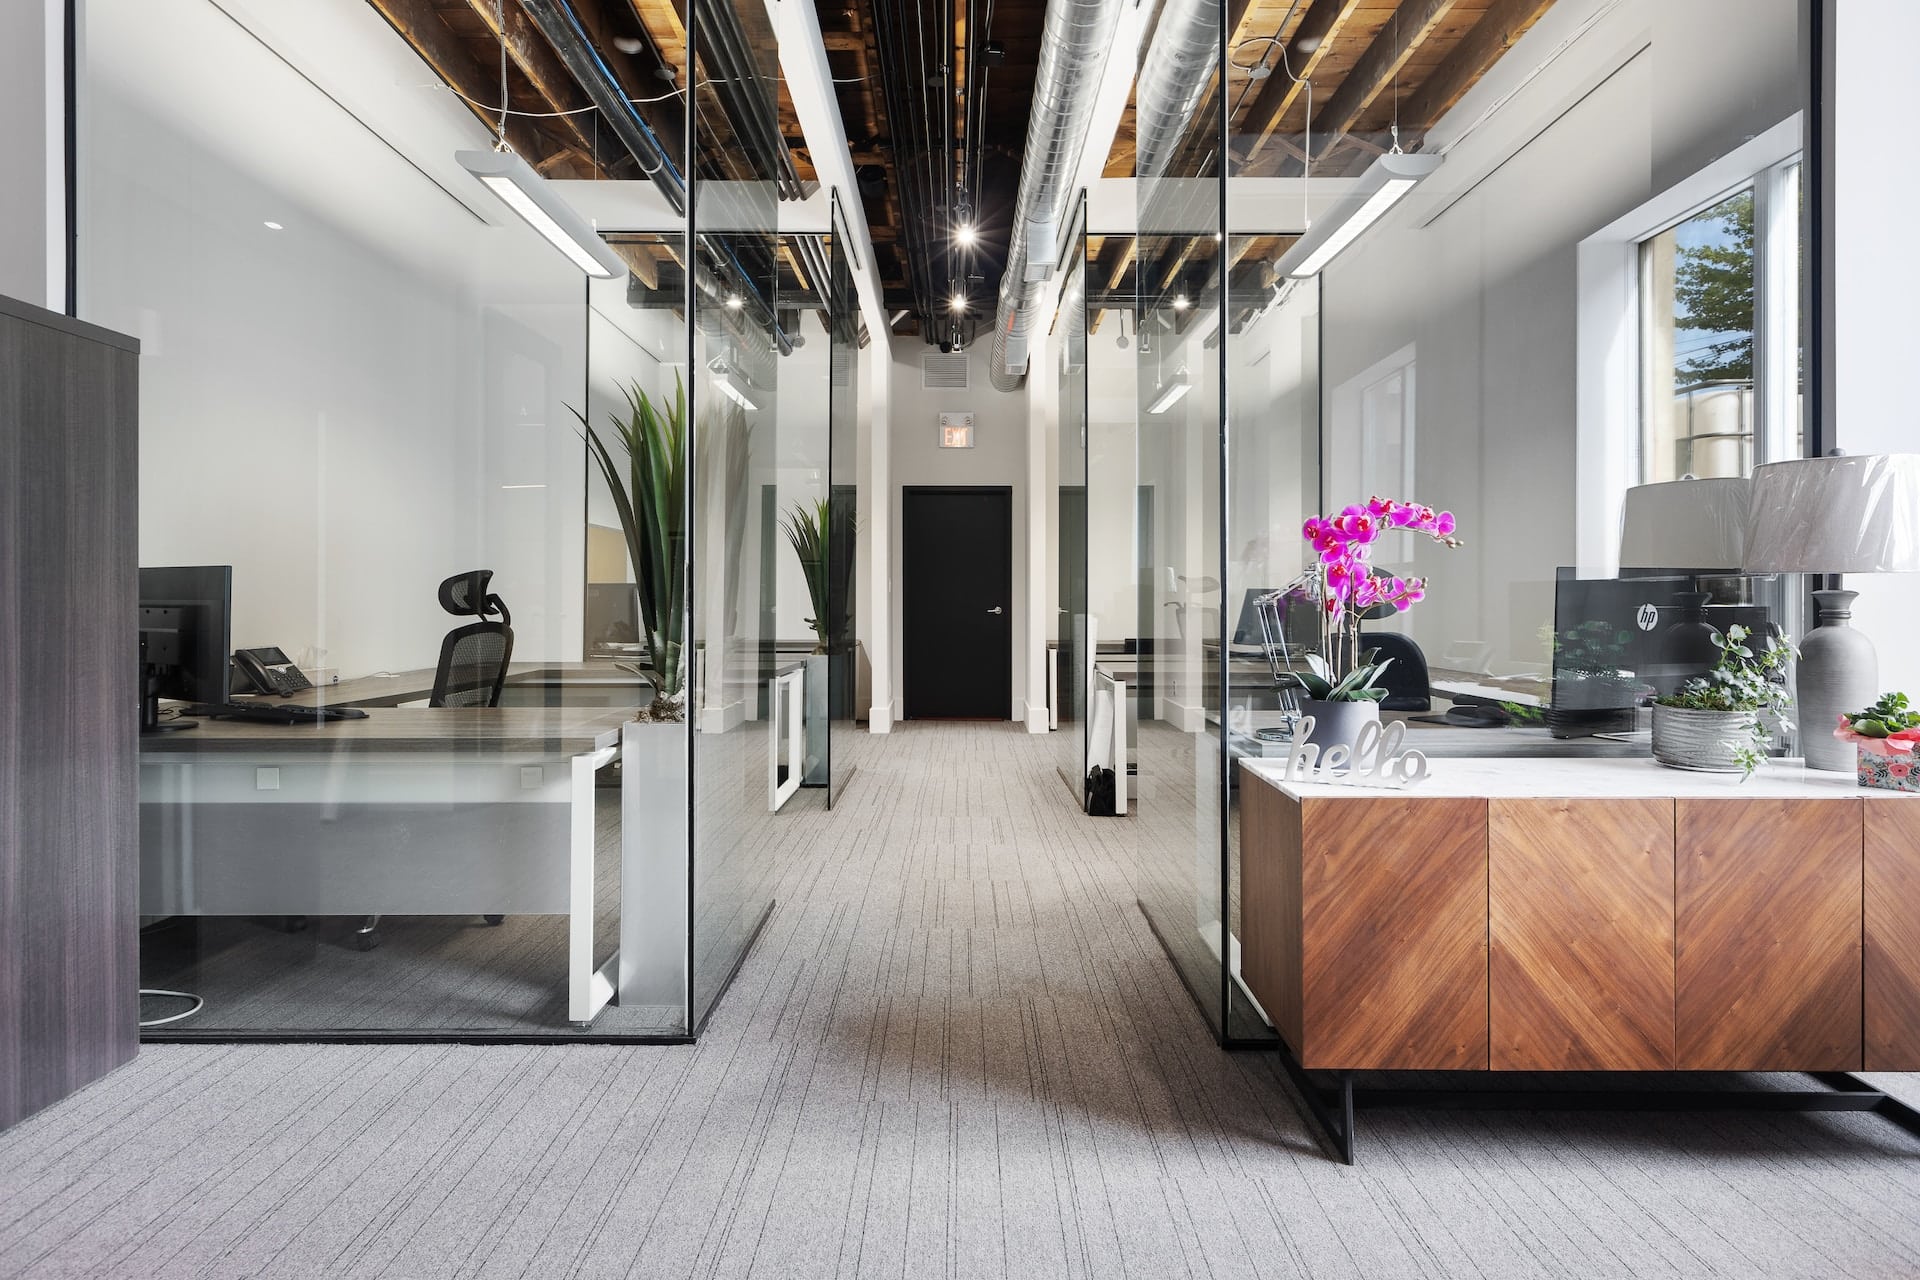 This description showcases a professional office setup with glass walls and a desk.